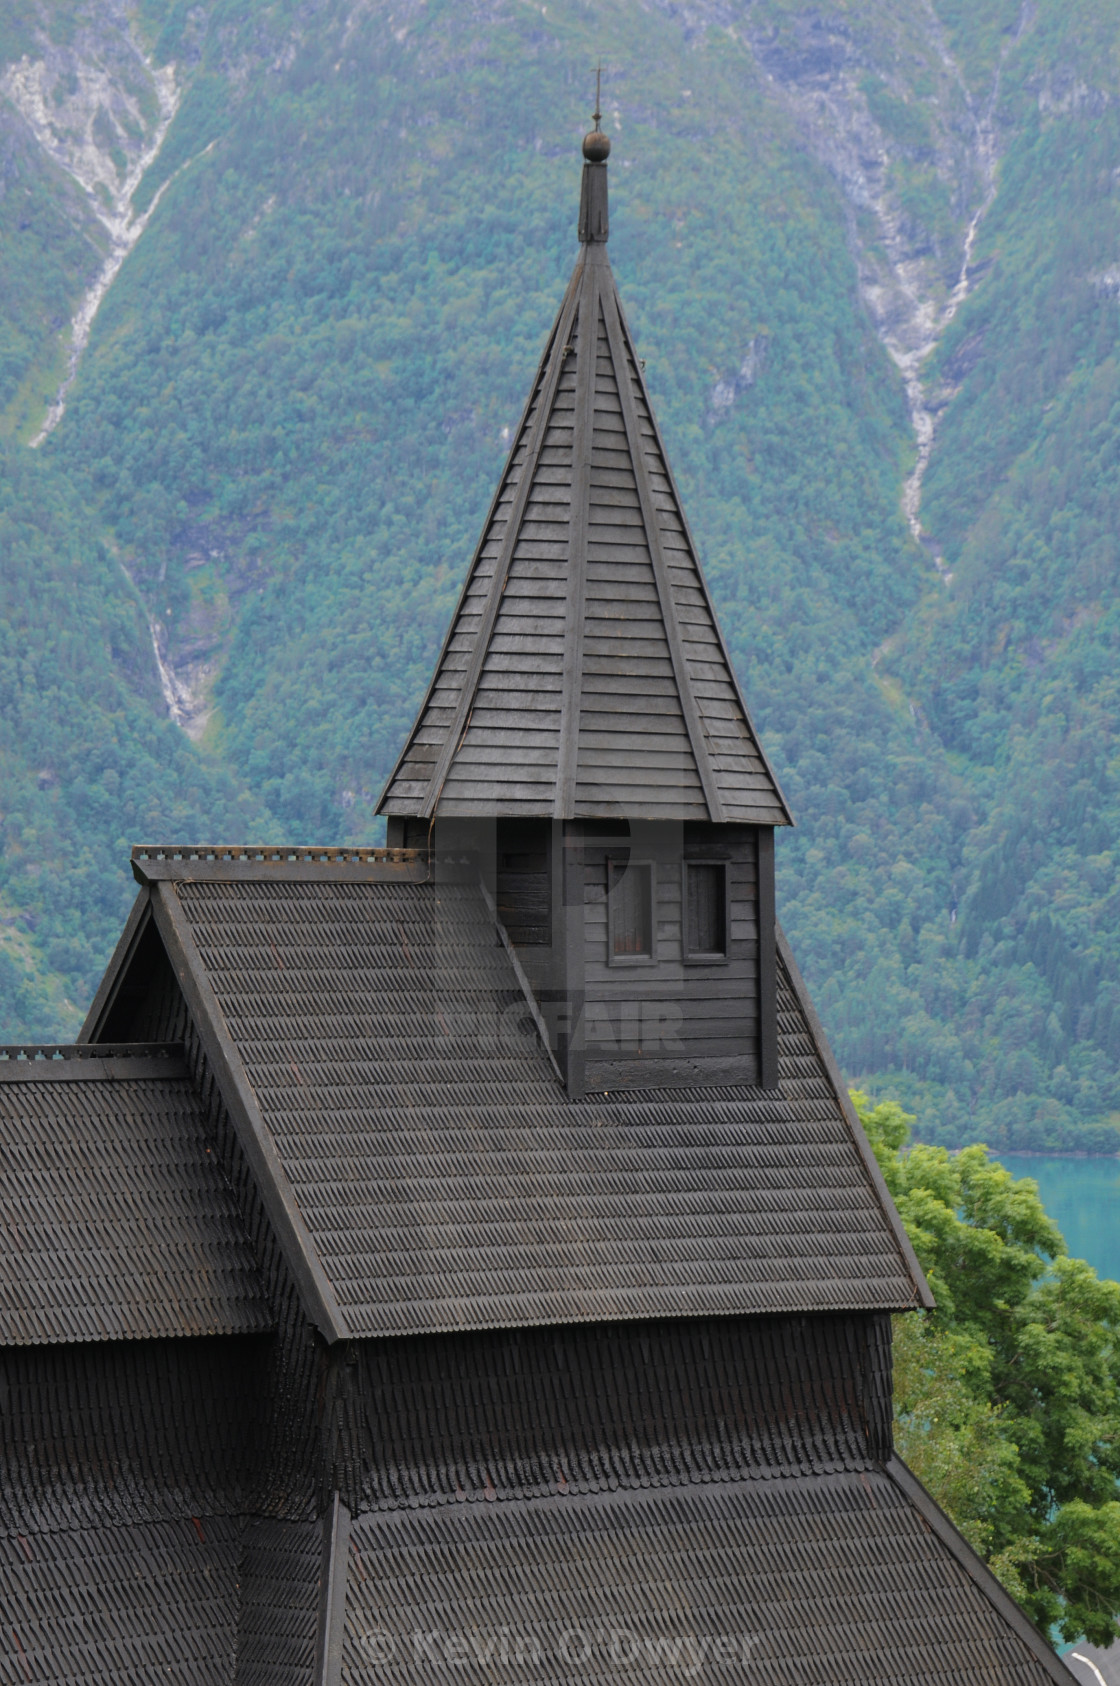 "Urnes Stave Church" stock image